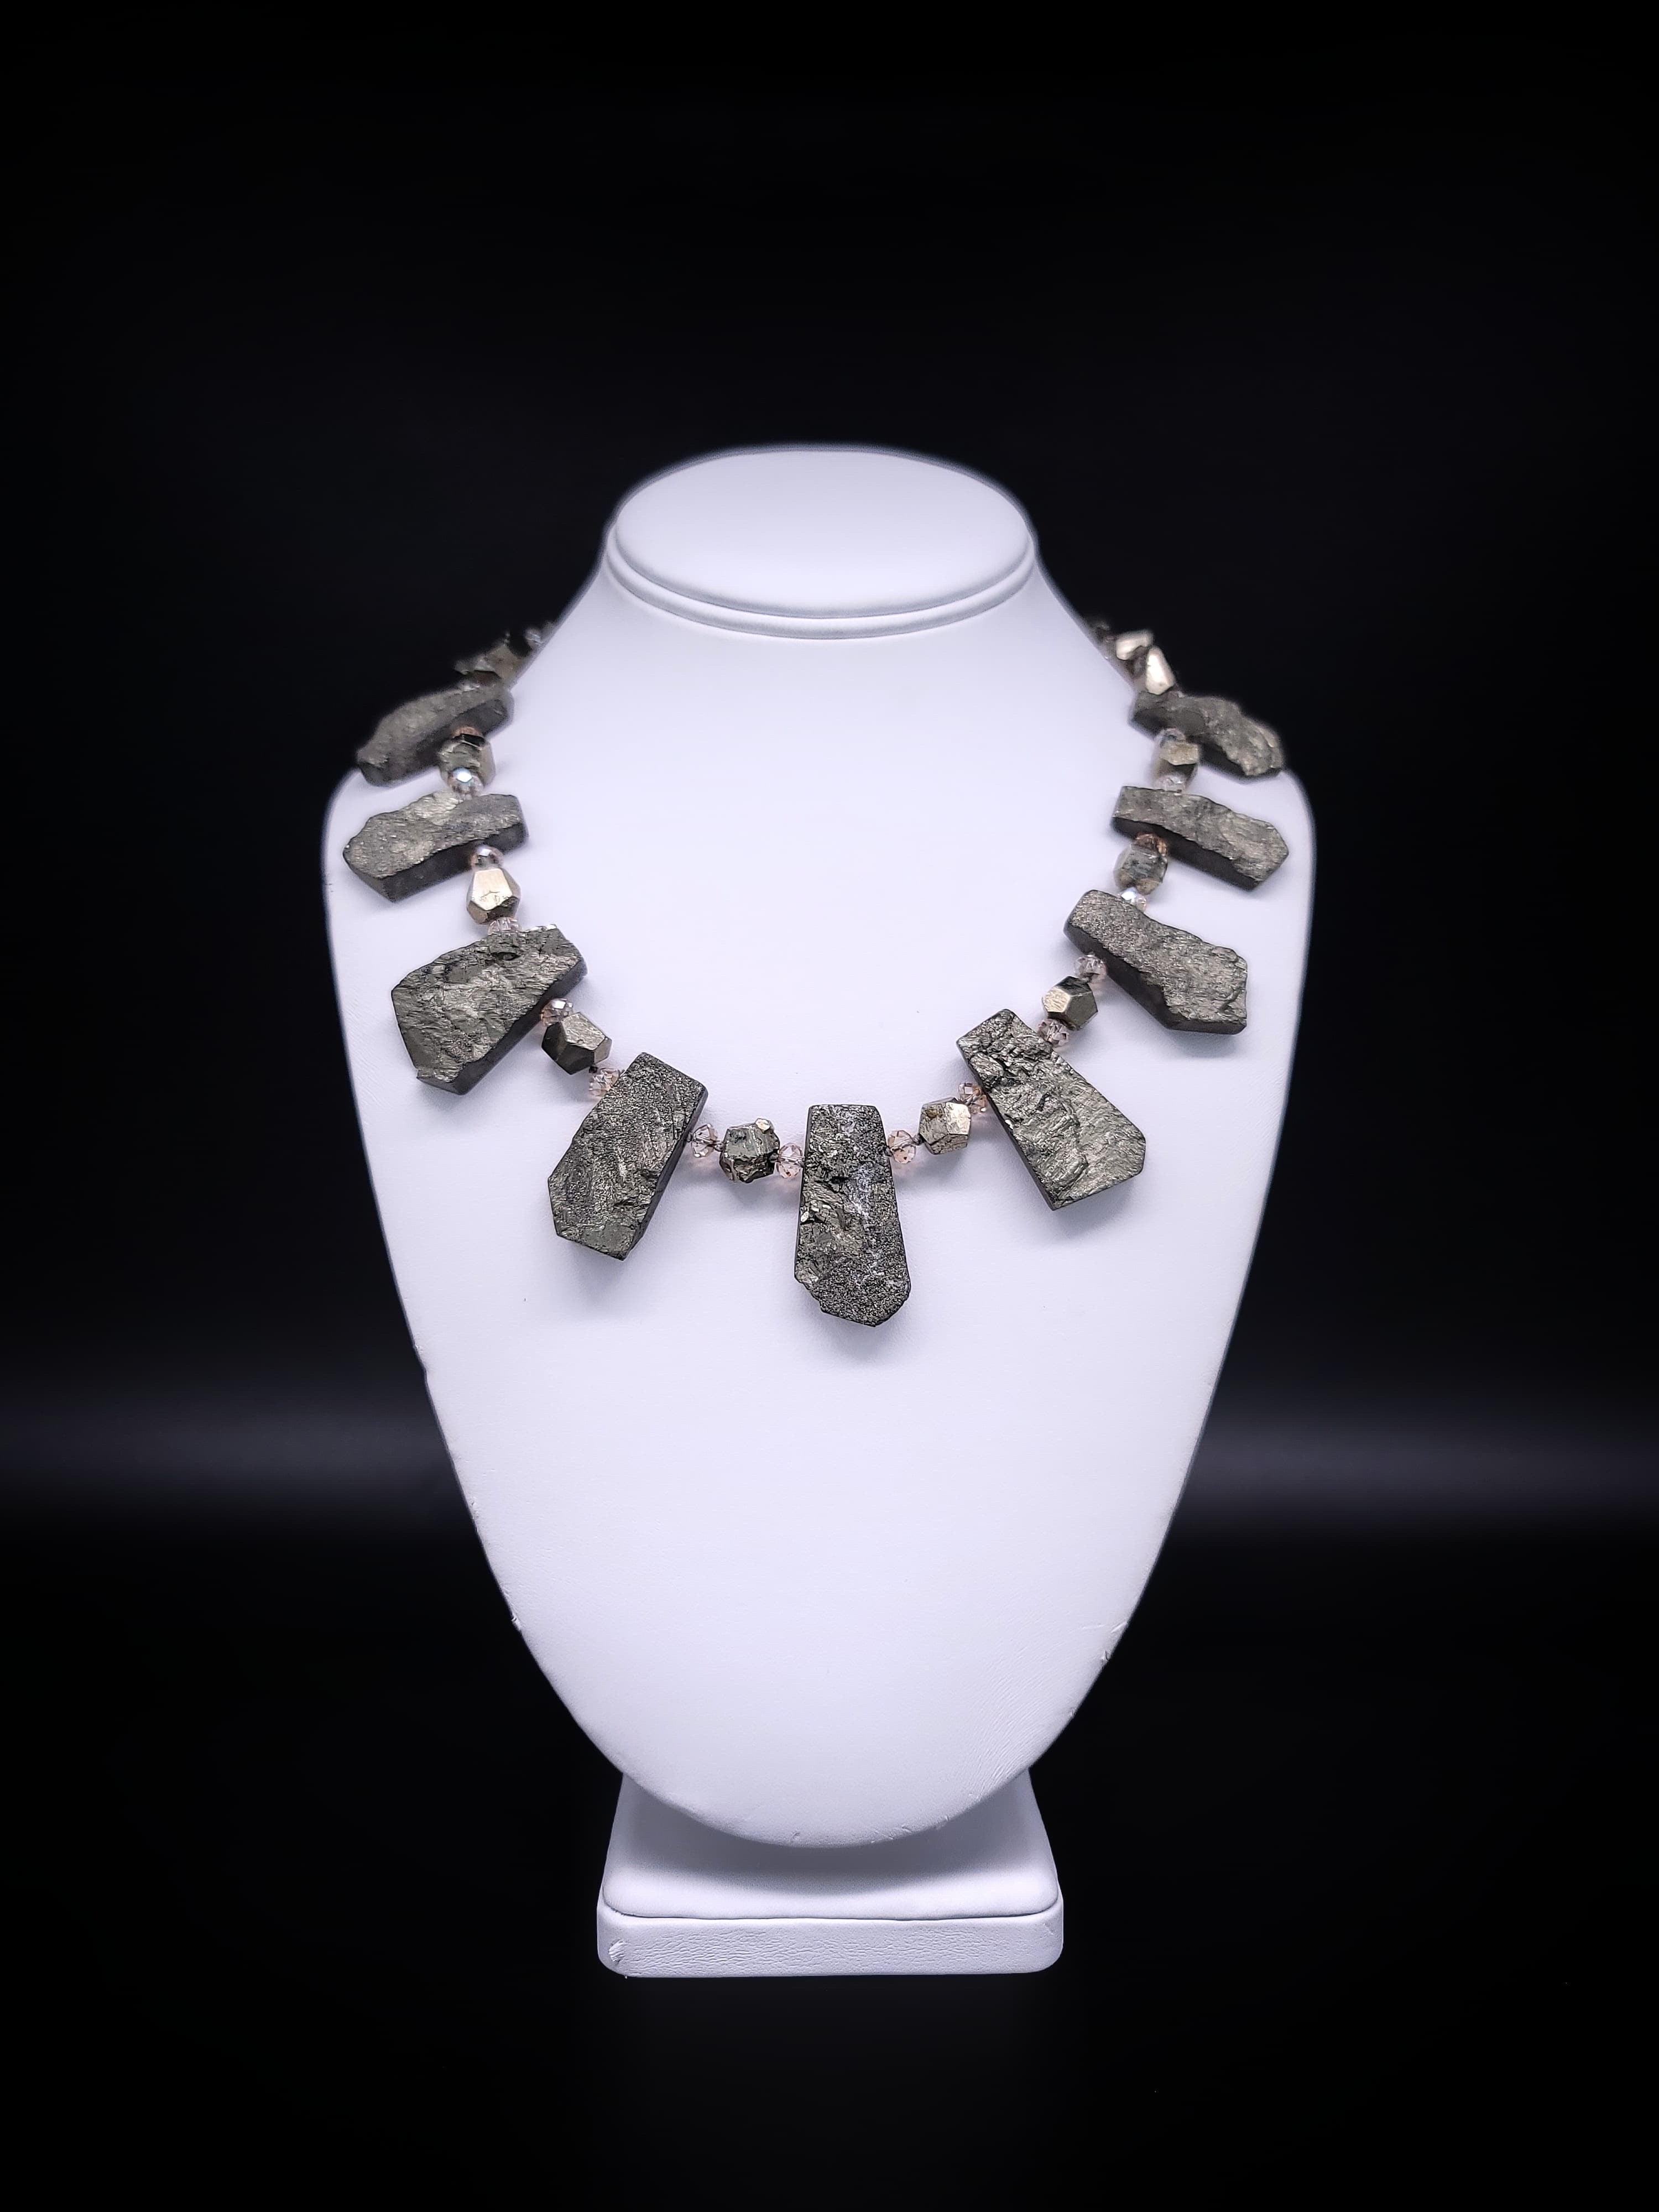 A.Jeschel Pyrite Necklace proving that all that glitters is not gold. For Sale